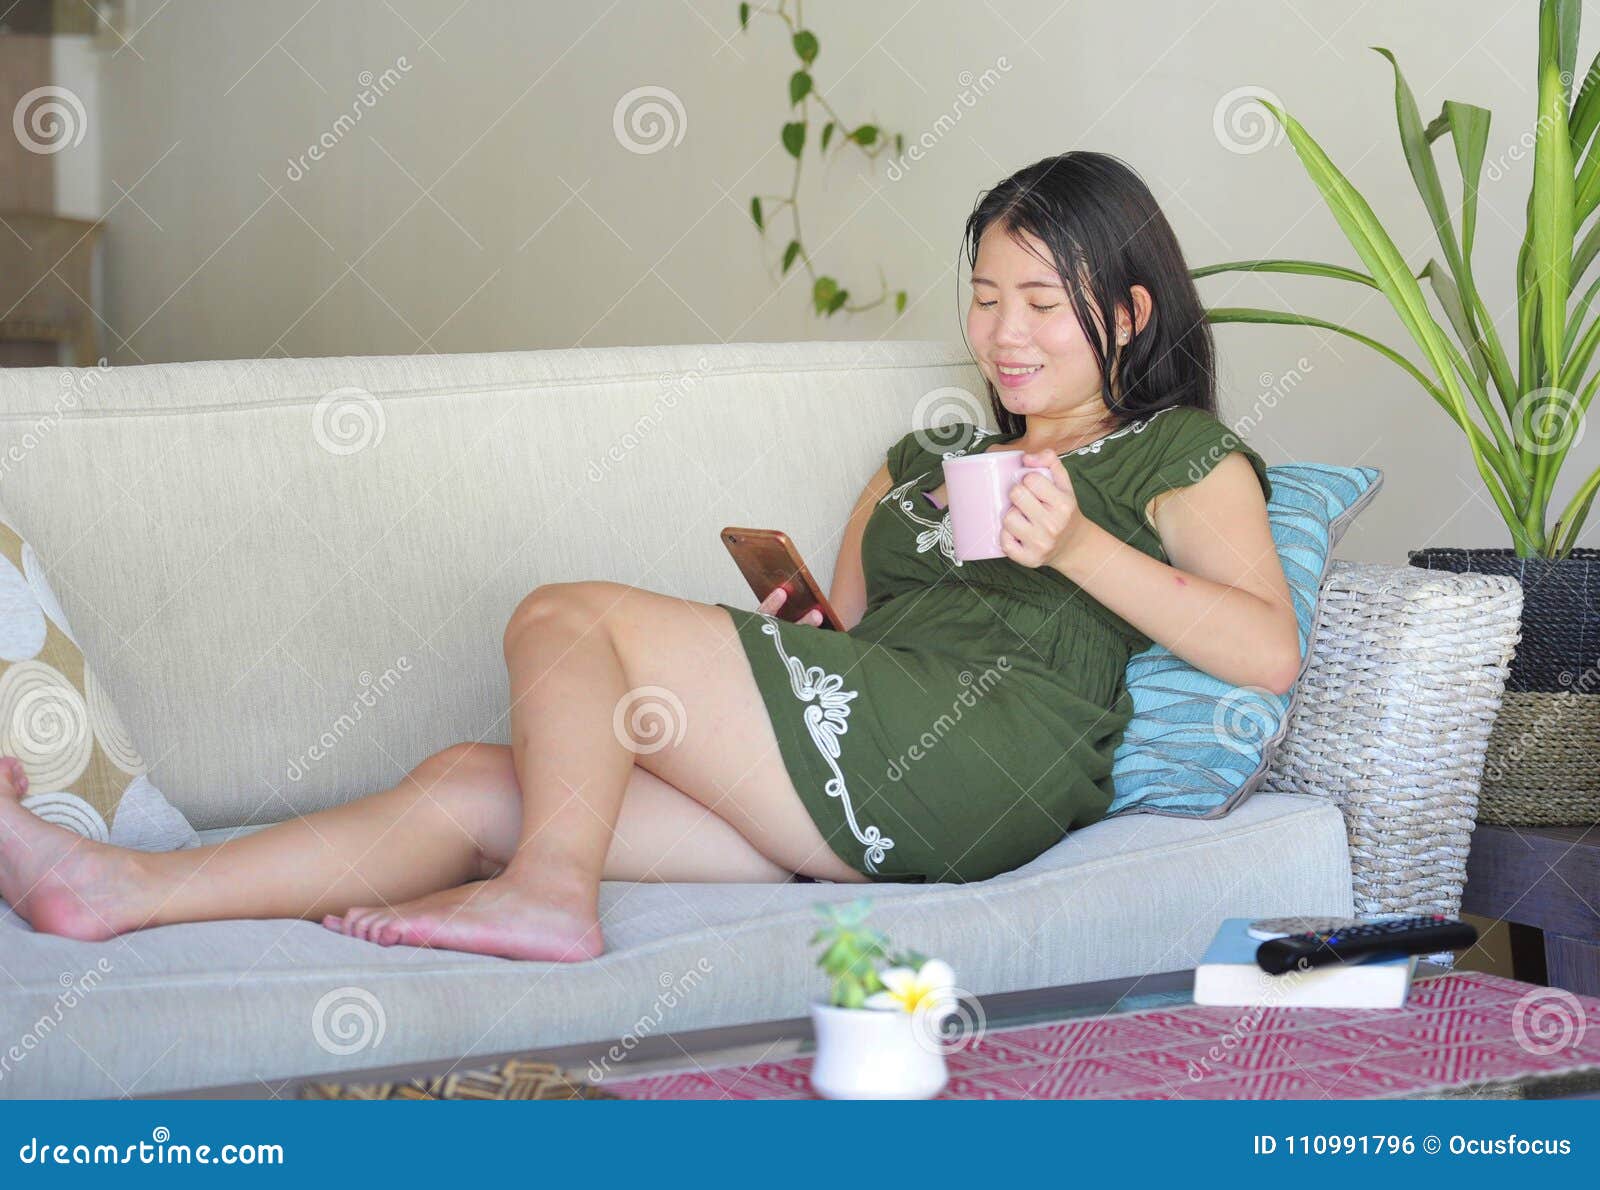 young-beautiful-relaxed-asian-chinese-woman-lying-home-living-room-sofa-couch-using-internet-mobile-phone-happy-110991796.jpg